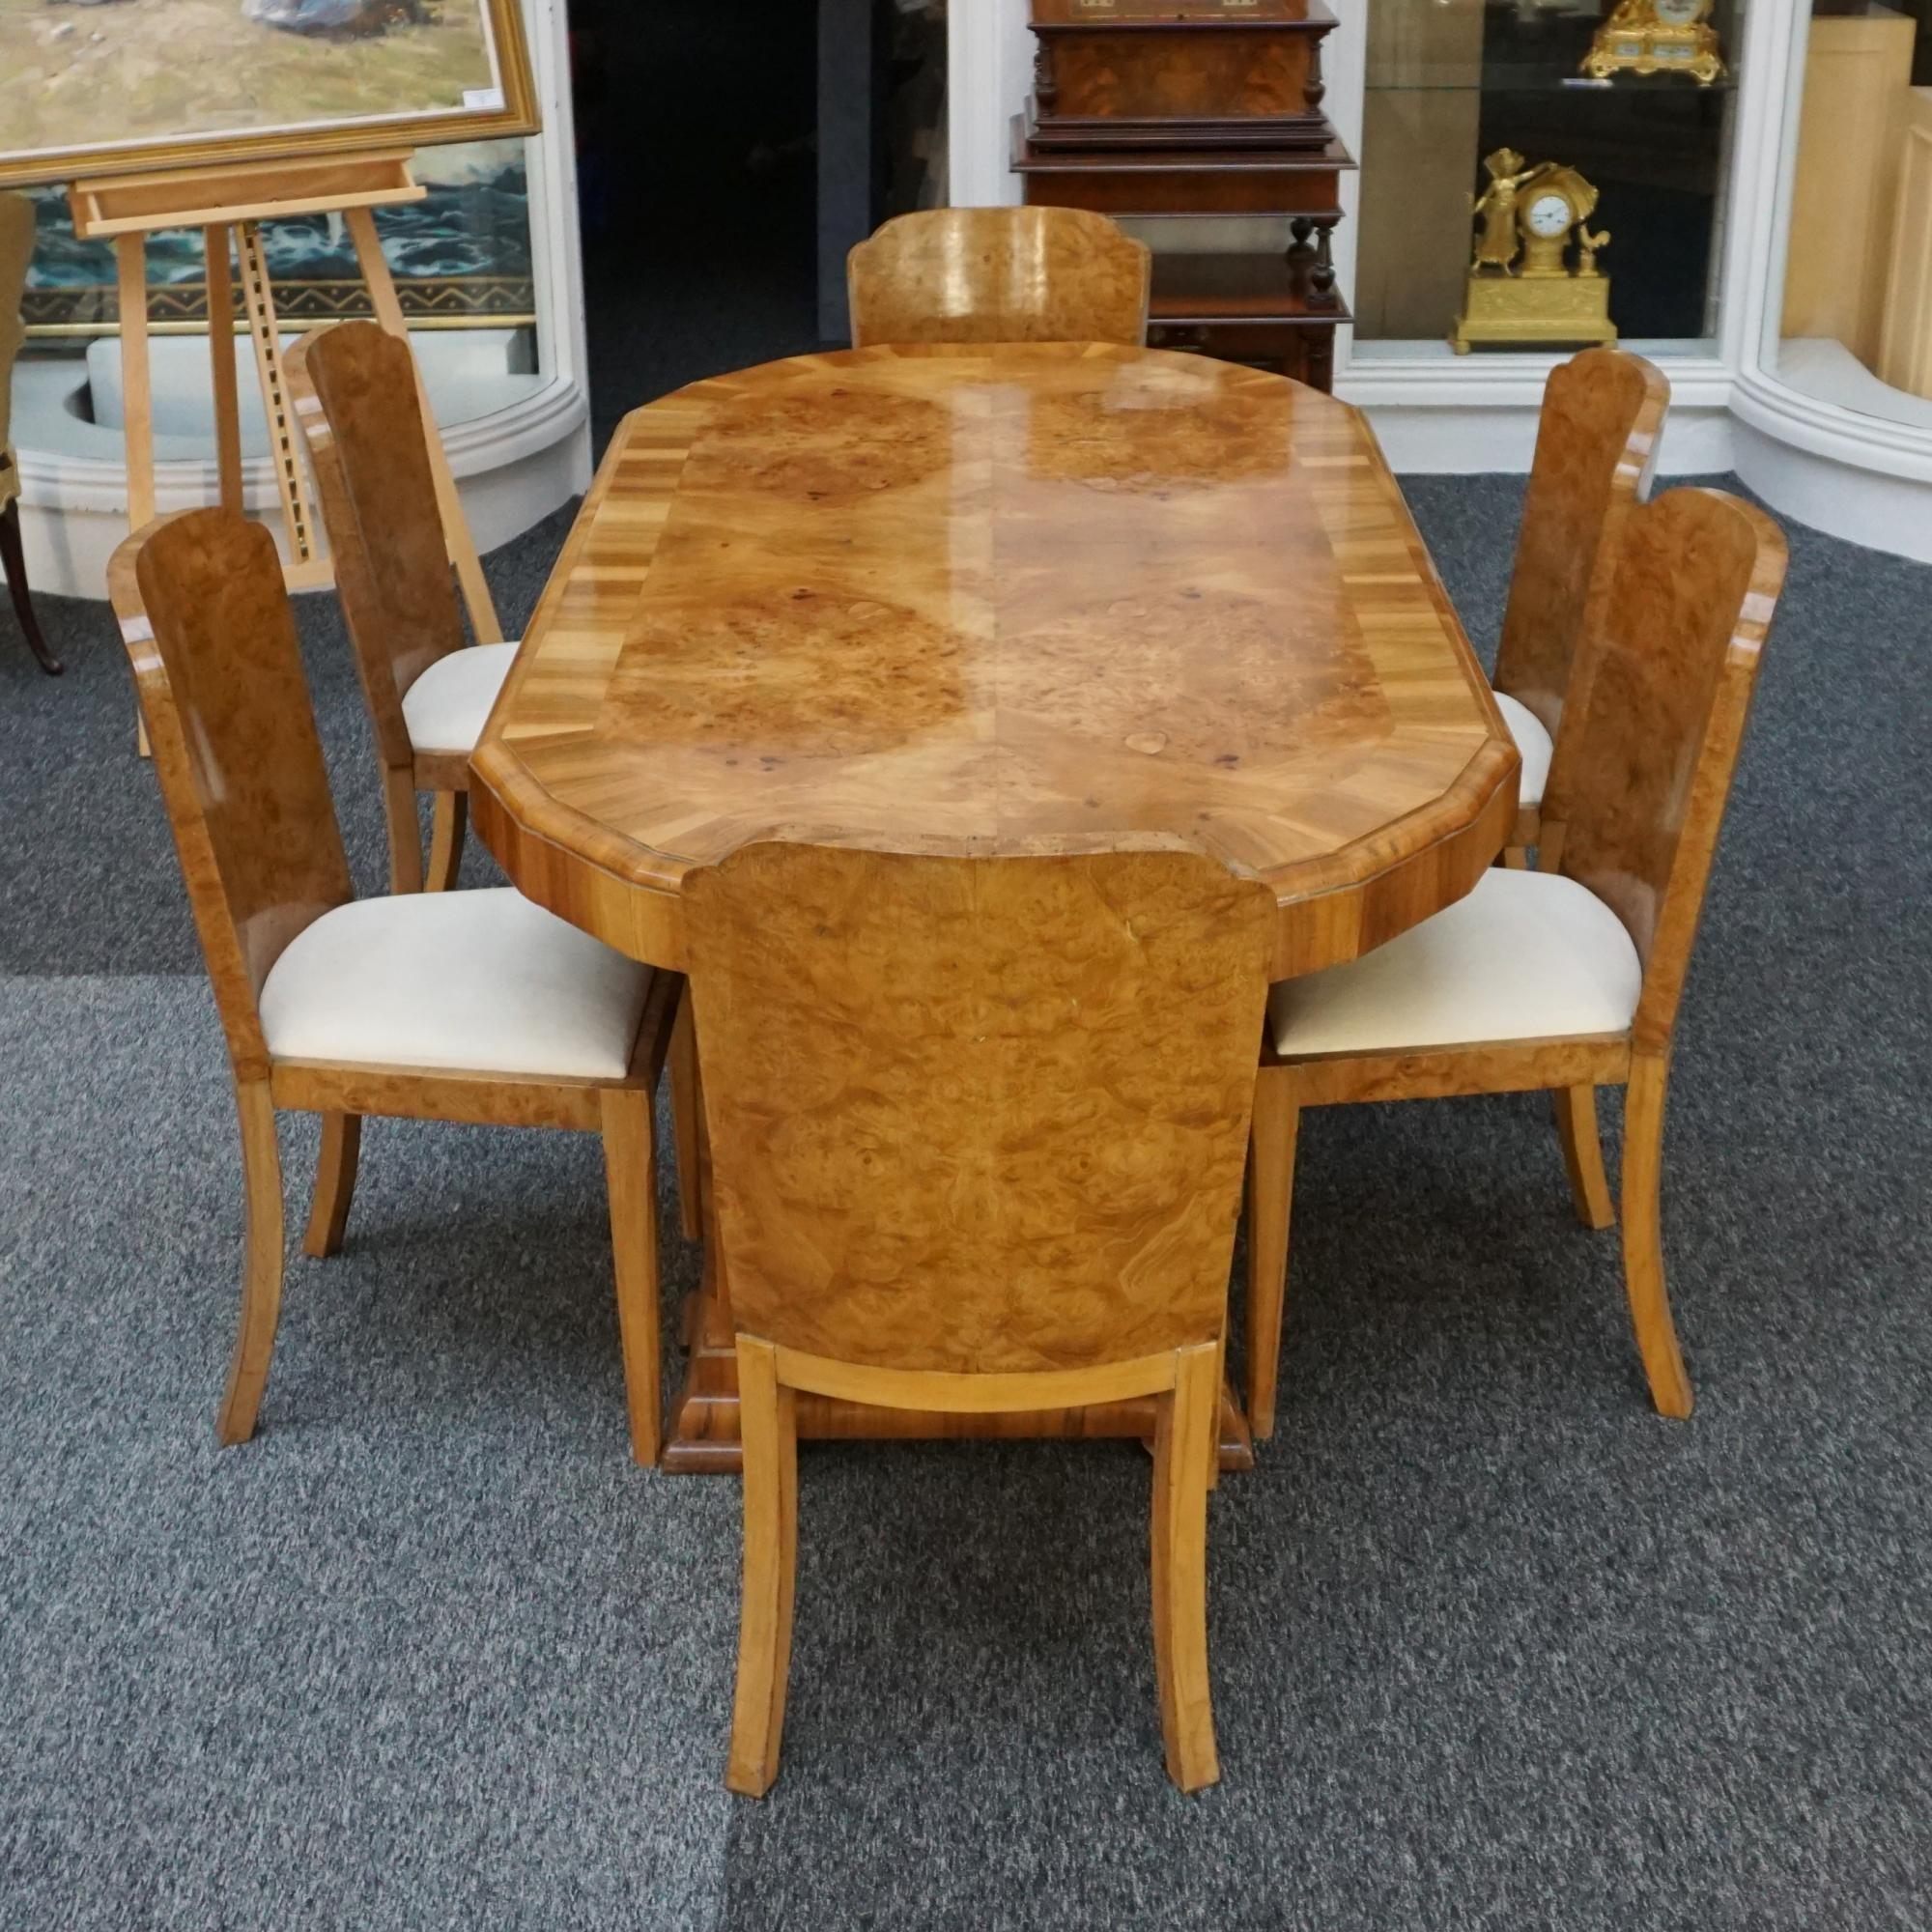 An Art Deco six seater dining suite. Burr walnut and figured walnut veneered dining table with six burr walnut veneered dining chairs. Faux suede upholstery. 

Dimensions: H 76cm W 97cm L 190cm Chair H 90.5cm W 44cm D 42cm Seat H 45cm

All of our